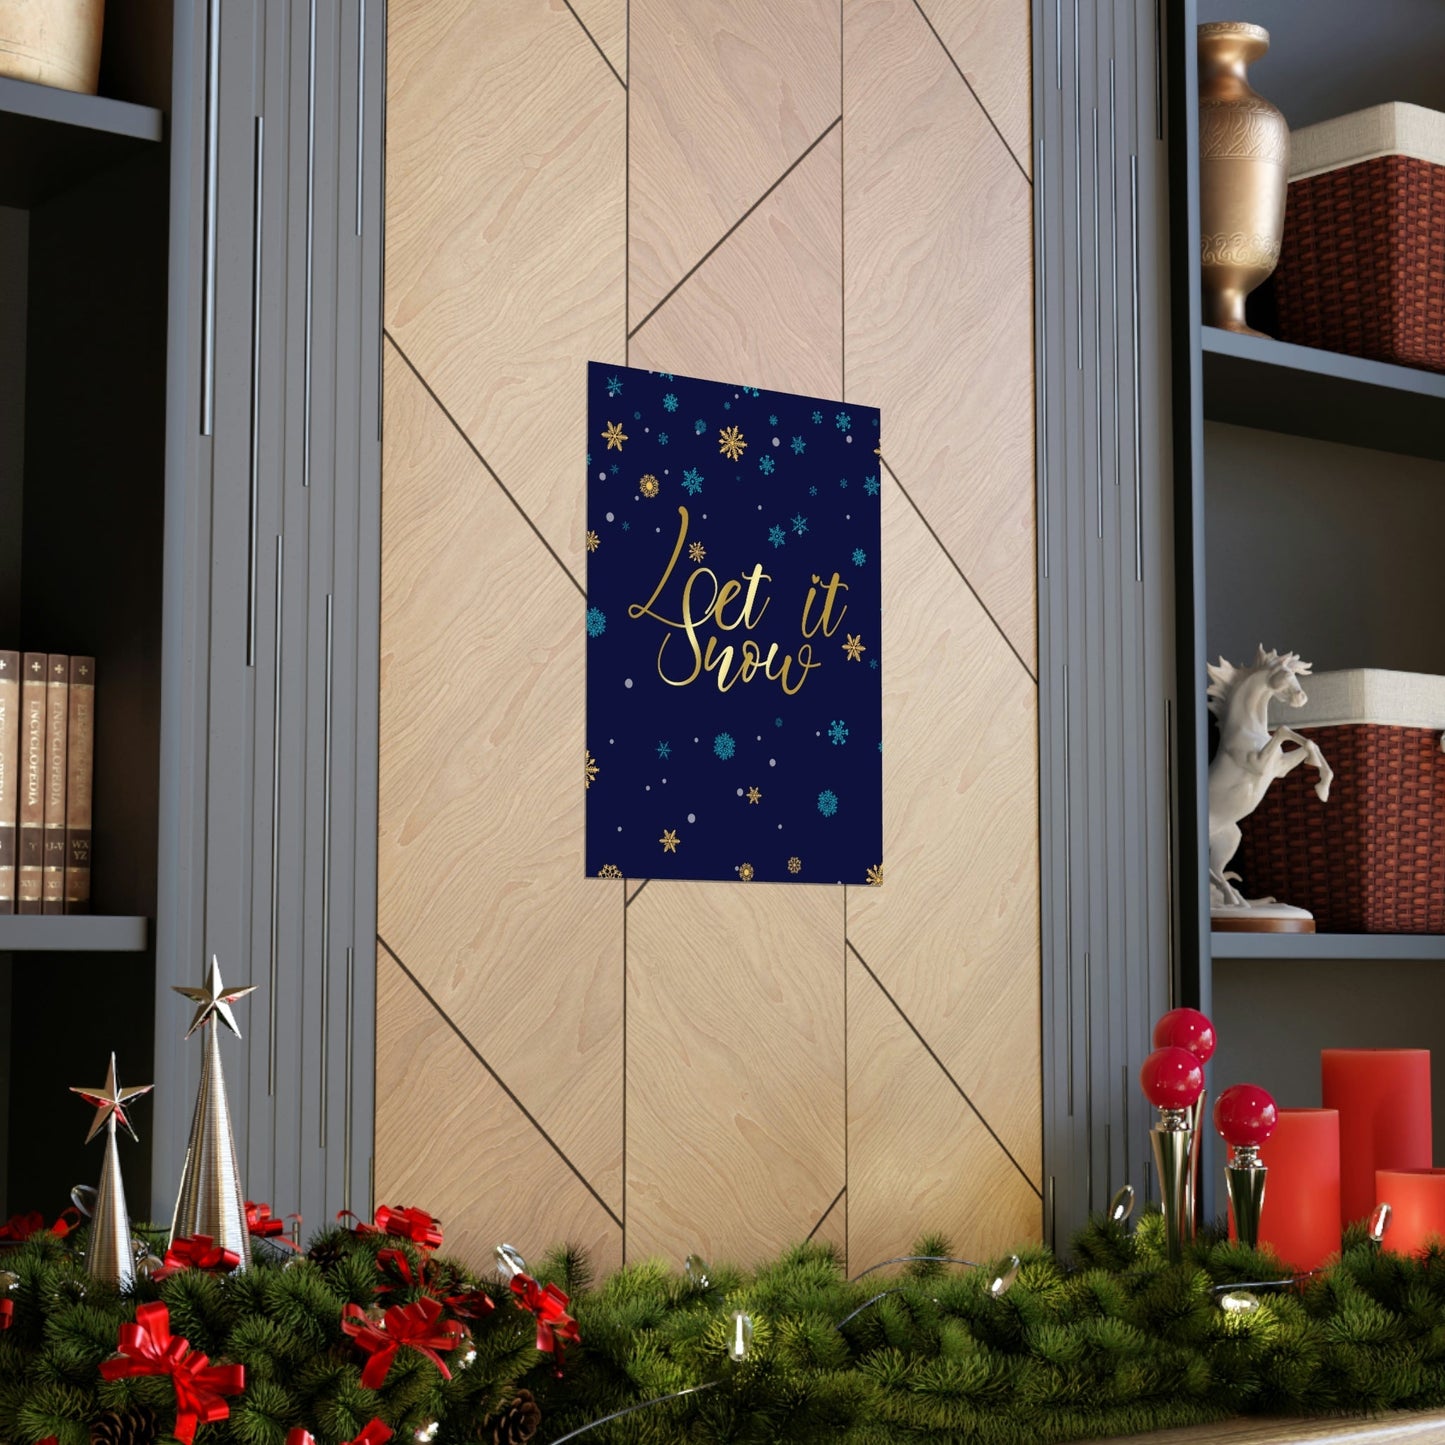 Let it Snow Pattern Christmas Typography Art Premium Matte Vertical Posters Ichaku [Perfect Gifts Selection]